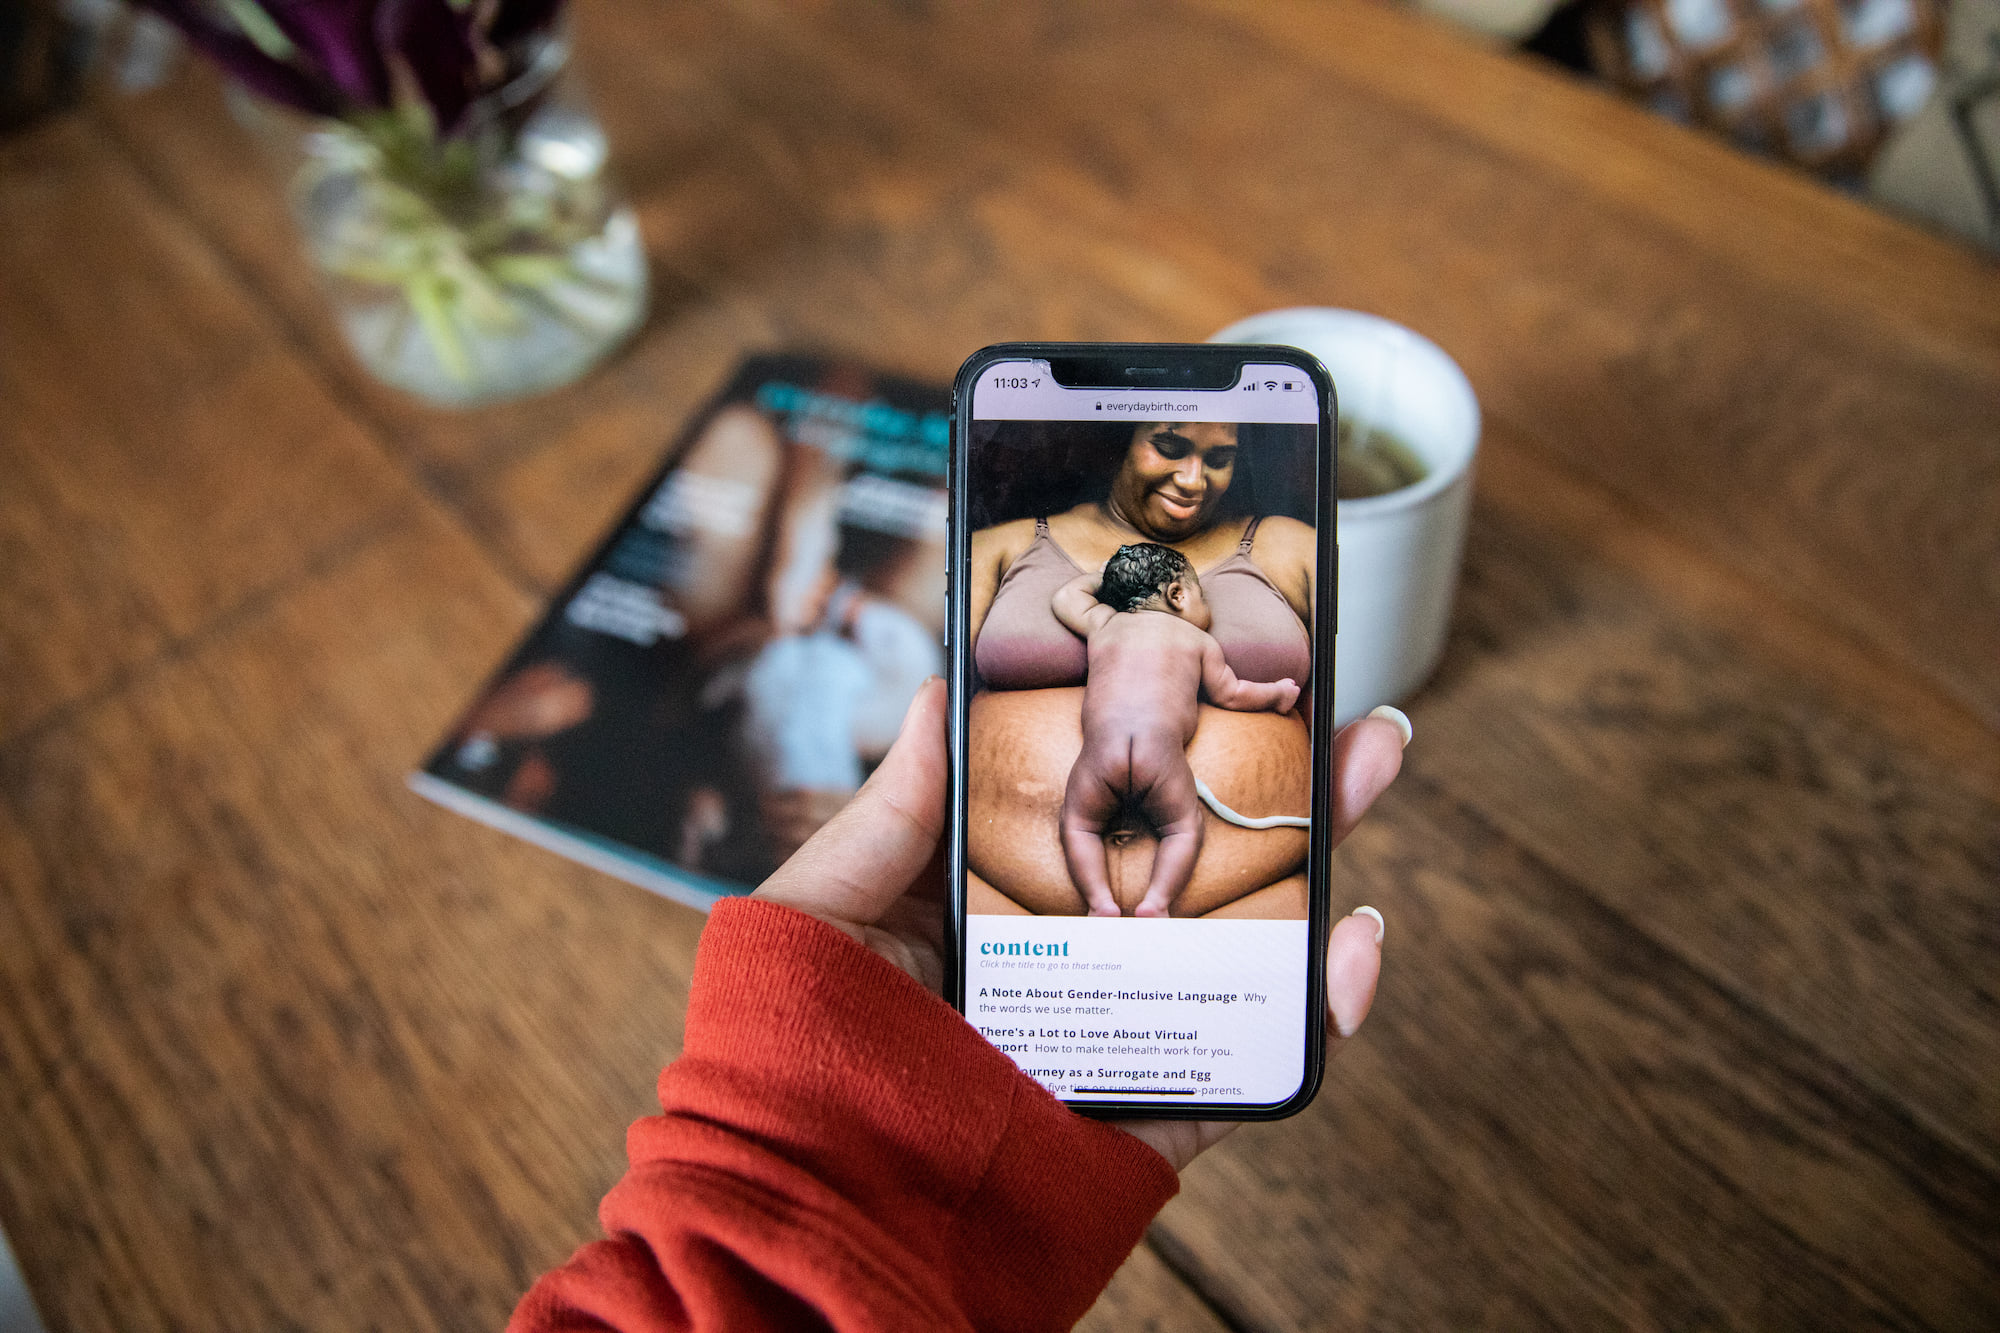 Hand holding a phone with an image from the magazine — a new plus-size parent happily holding their newborn on their chest.